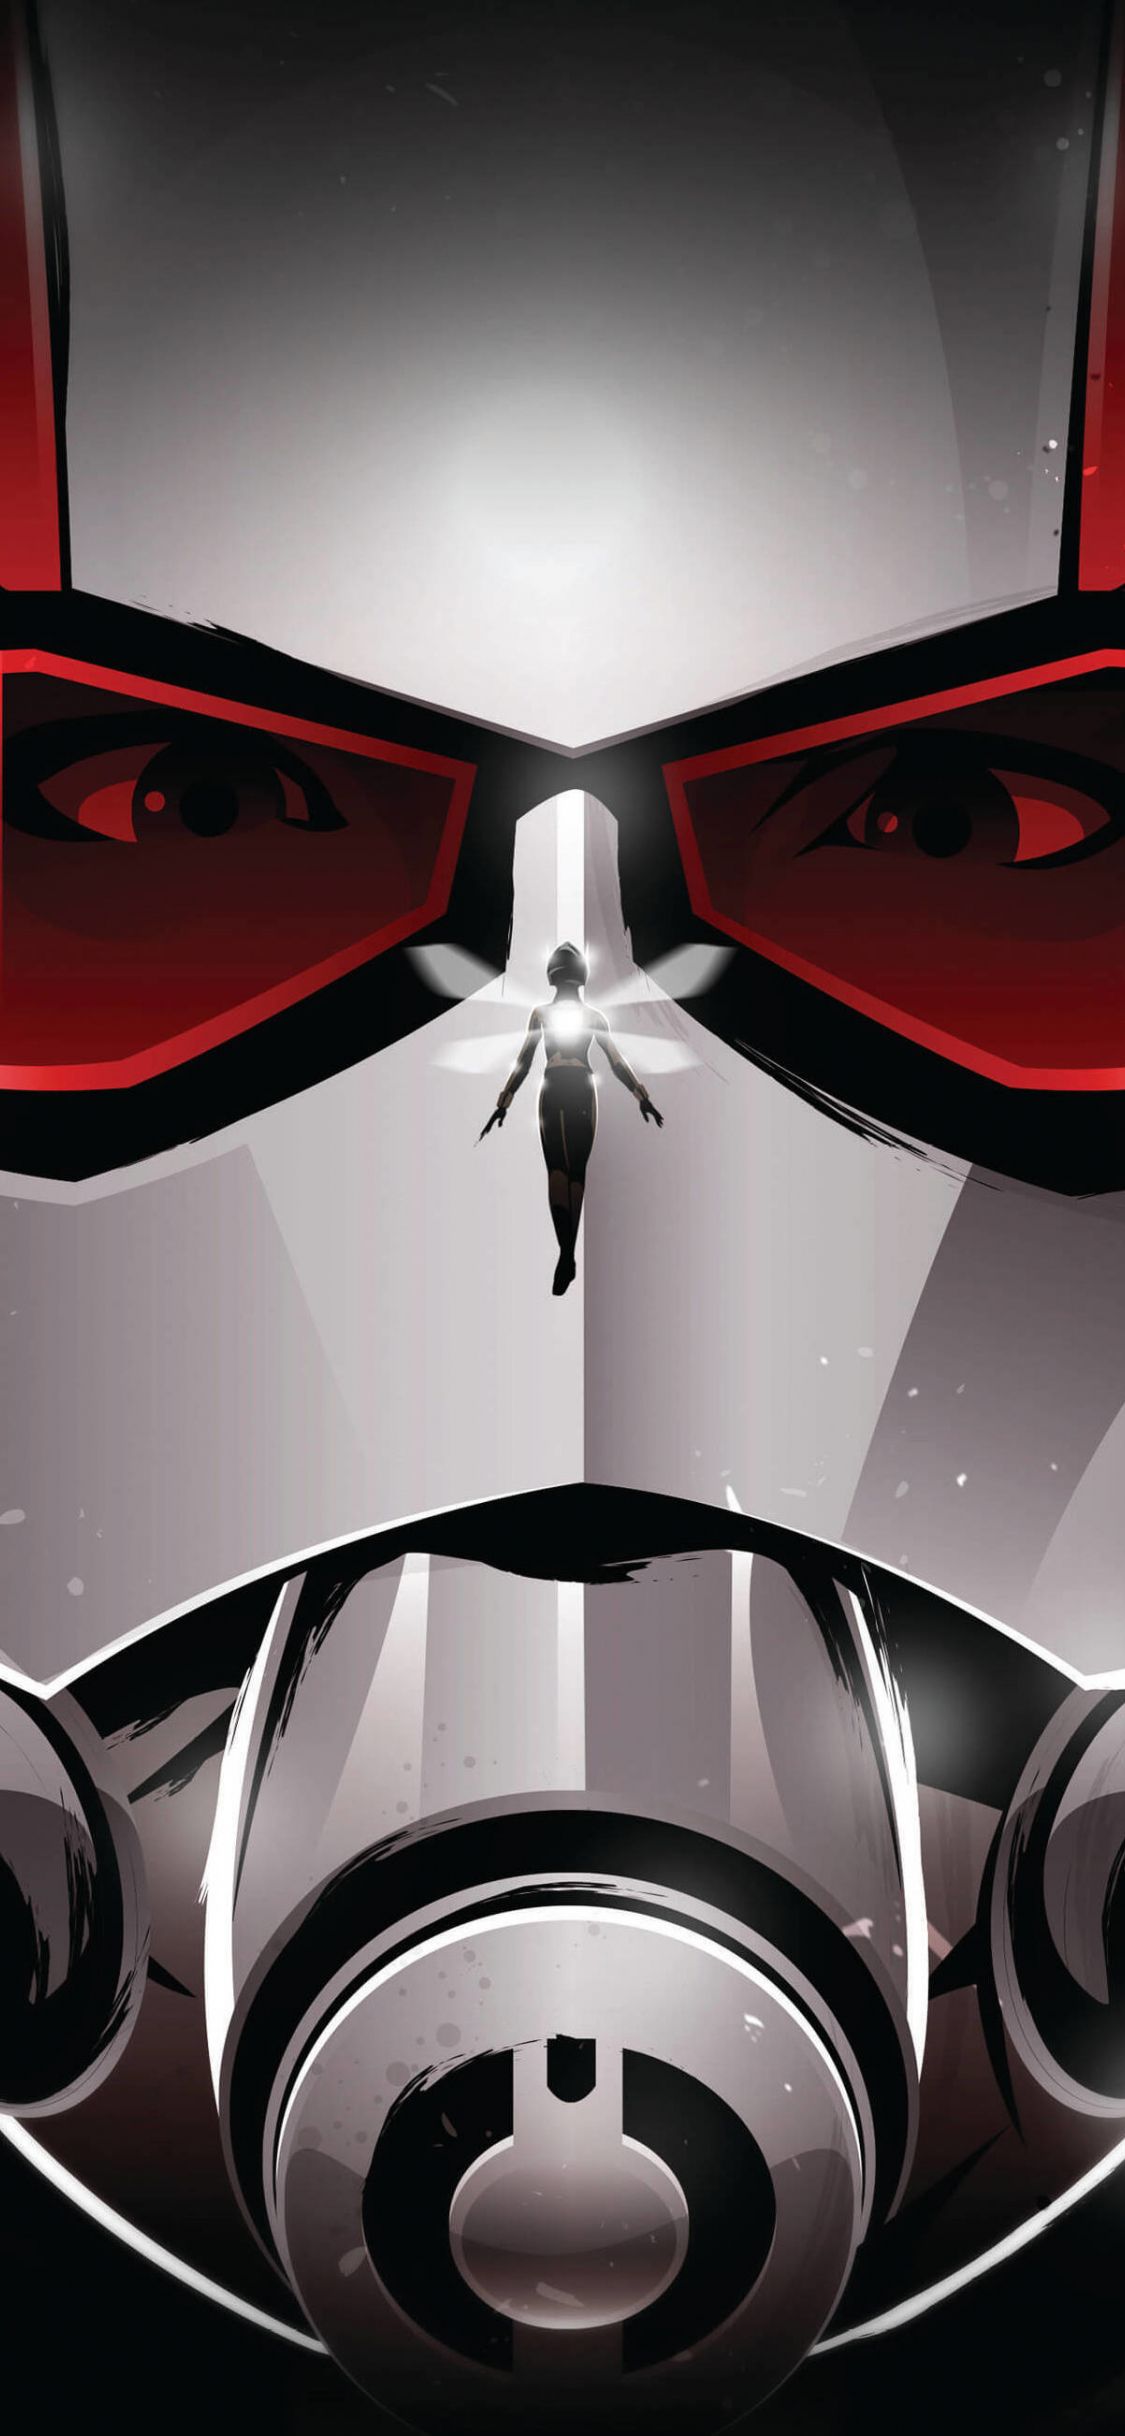 Download 1125x2436 Wallpaper Ant Man And The Wasp, Starburst, Magazine, Artwork, Iphone X 1125x2436 HD Image, Background, 9710